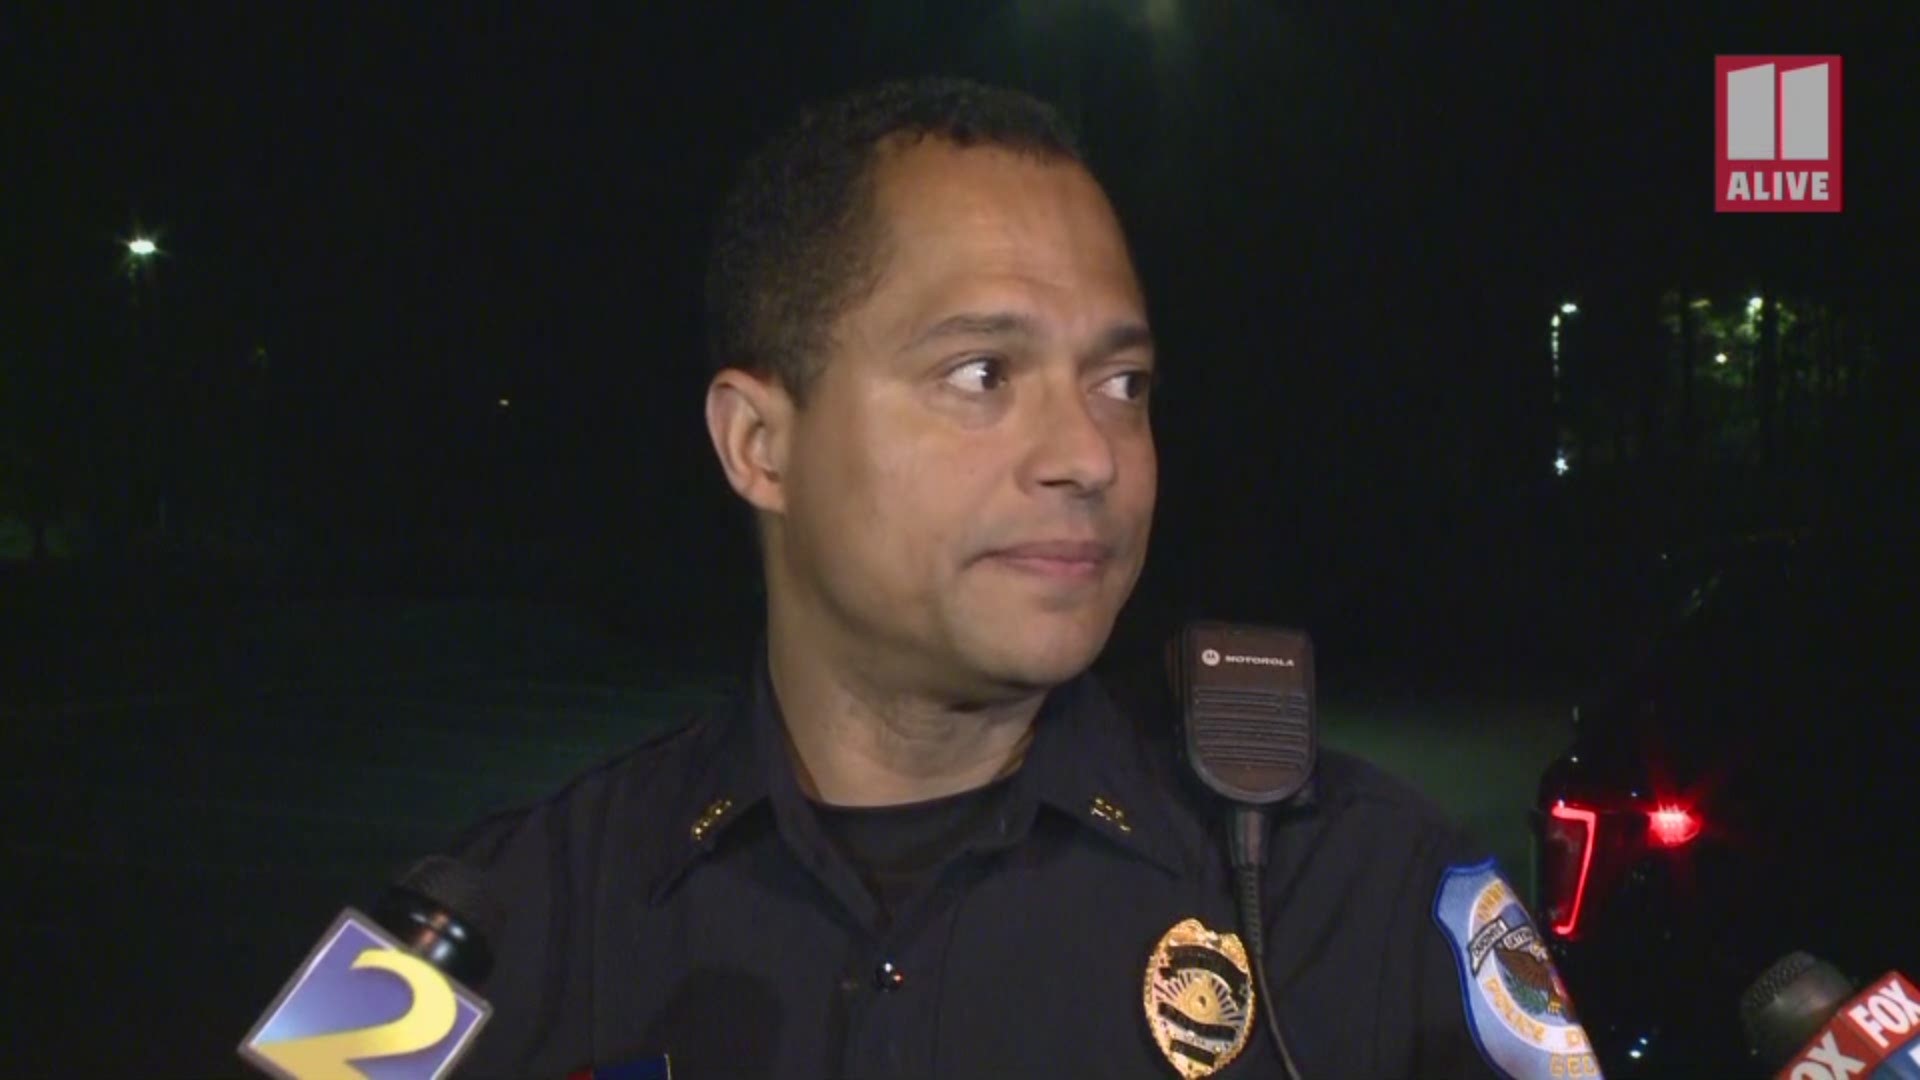 Cobb Police Spokesperson Wayne Delk provides more details on a shooting at a Windy Hill gas station that left one person injured and lead to a massive police response.